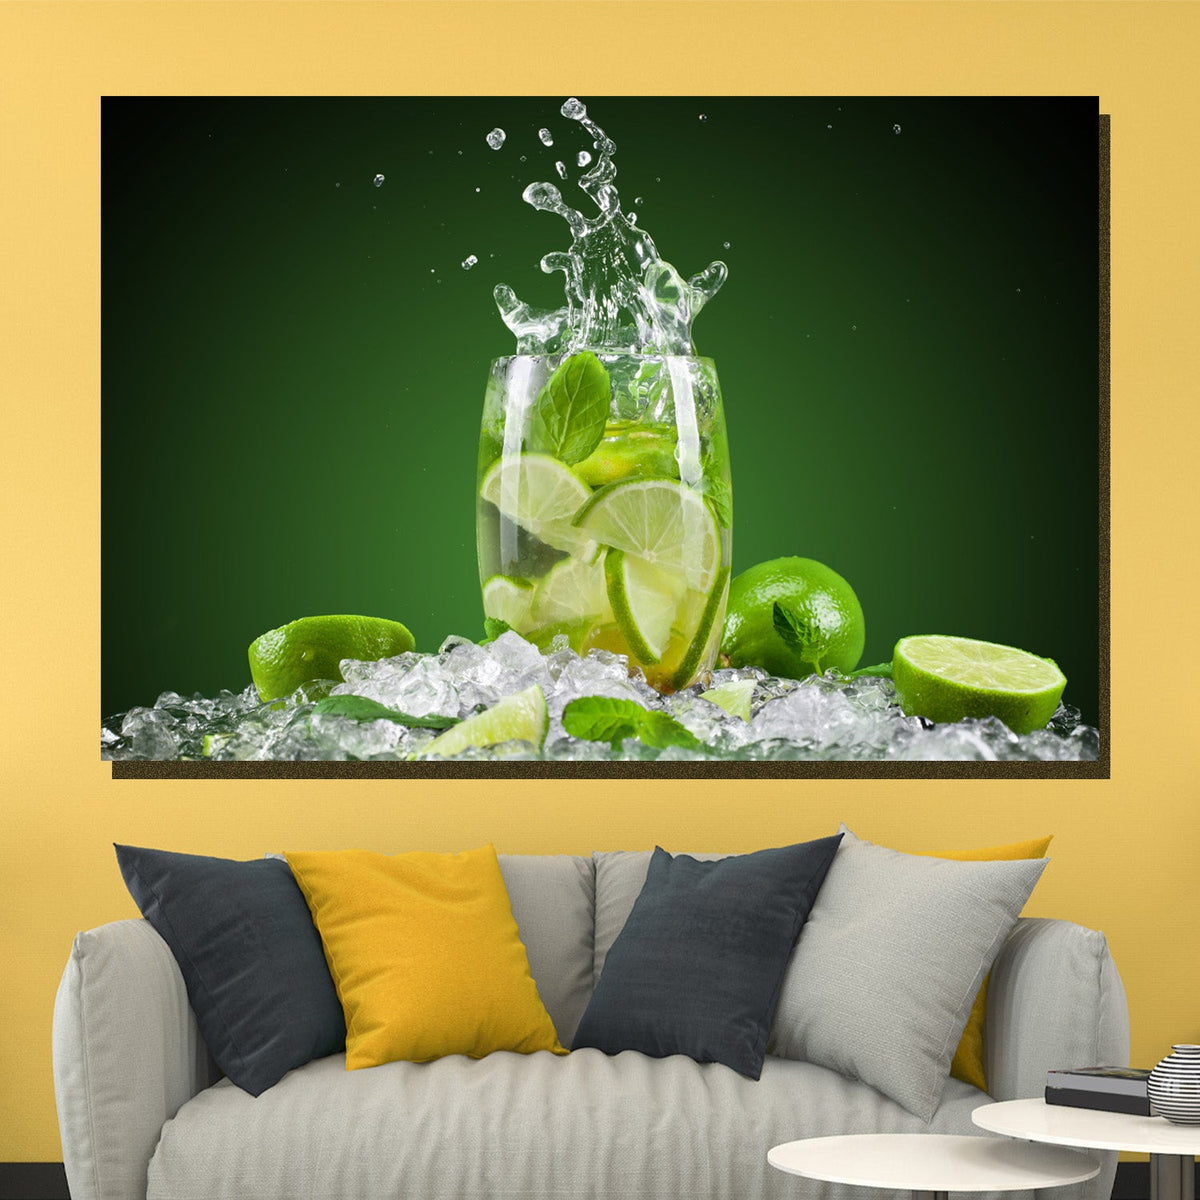 https://cdn.shopify.com/s/files/1/0387/9986/8044/products/MojitoCanvasArtprintStretched-1.jpg